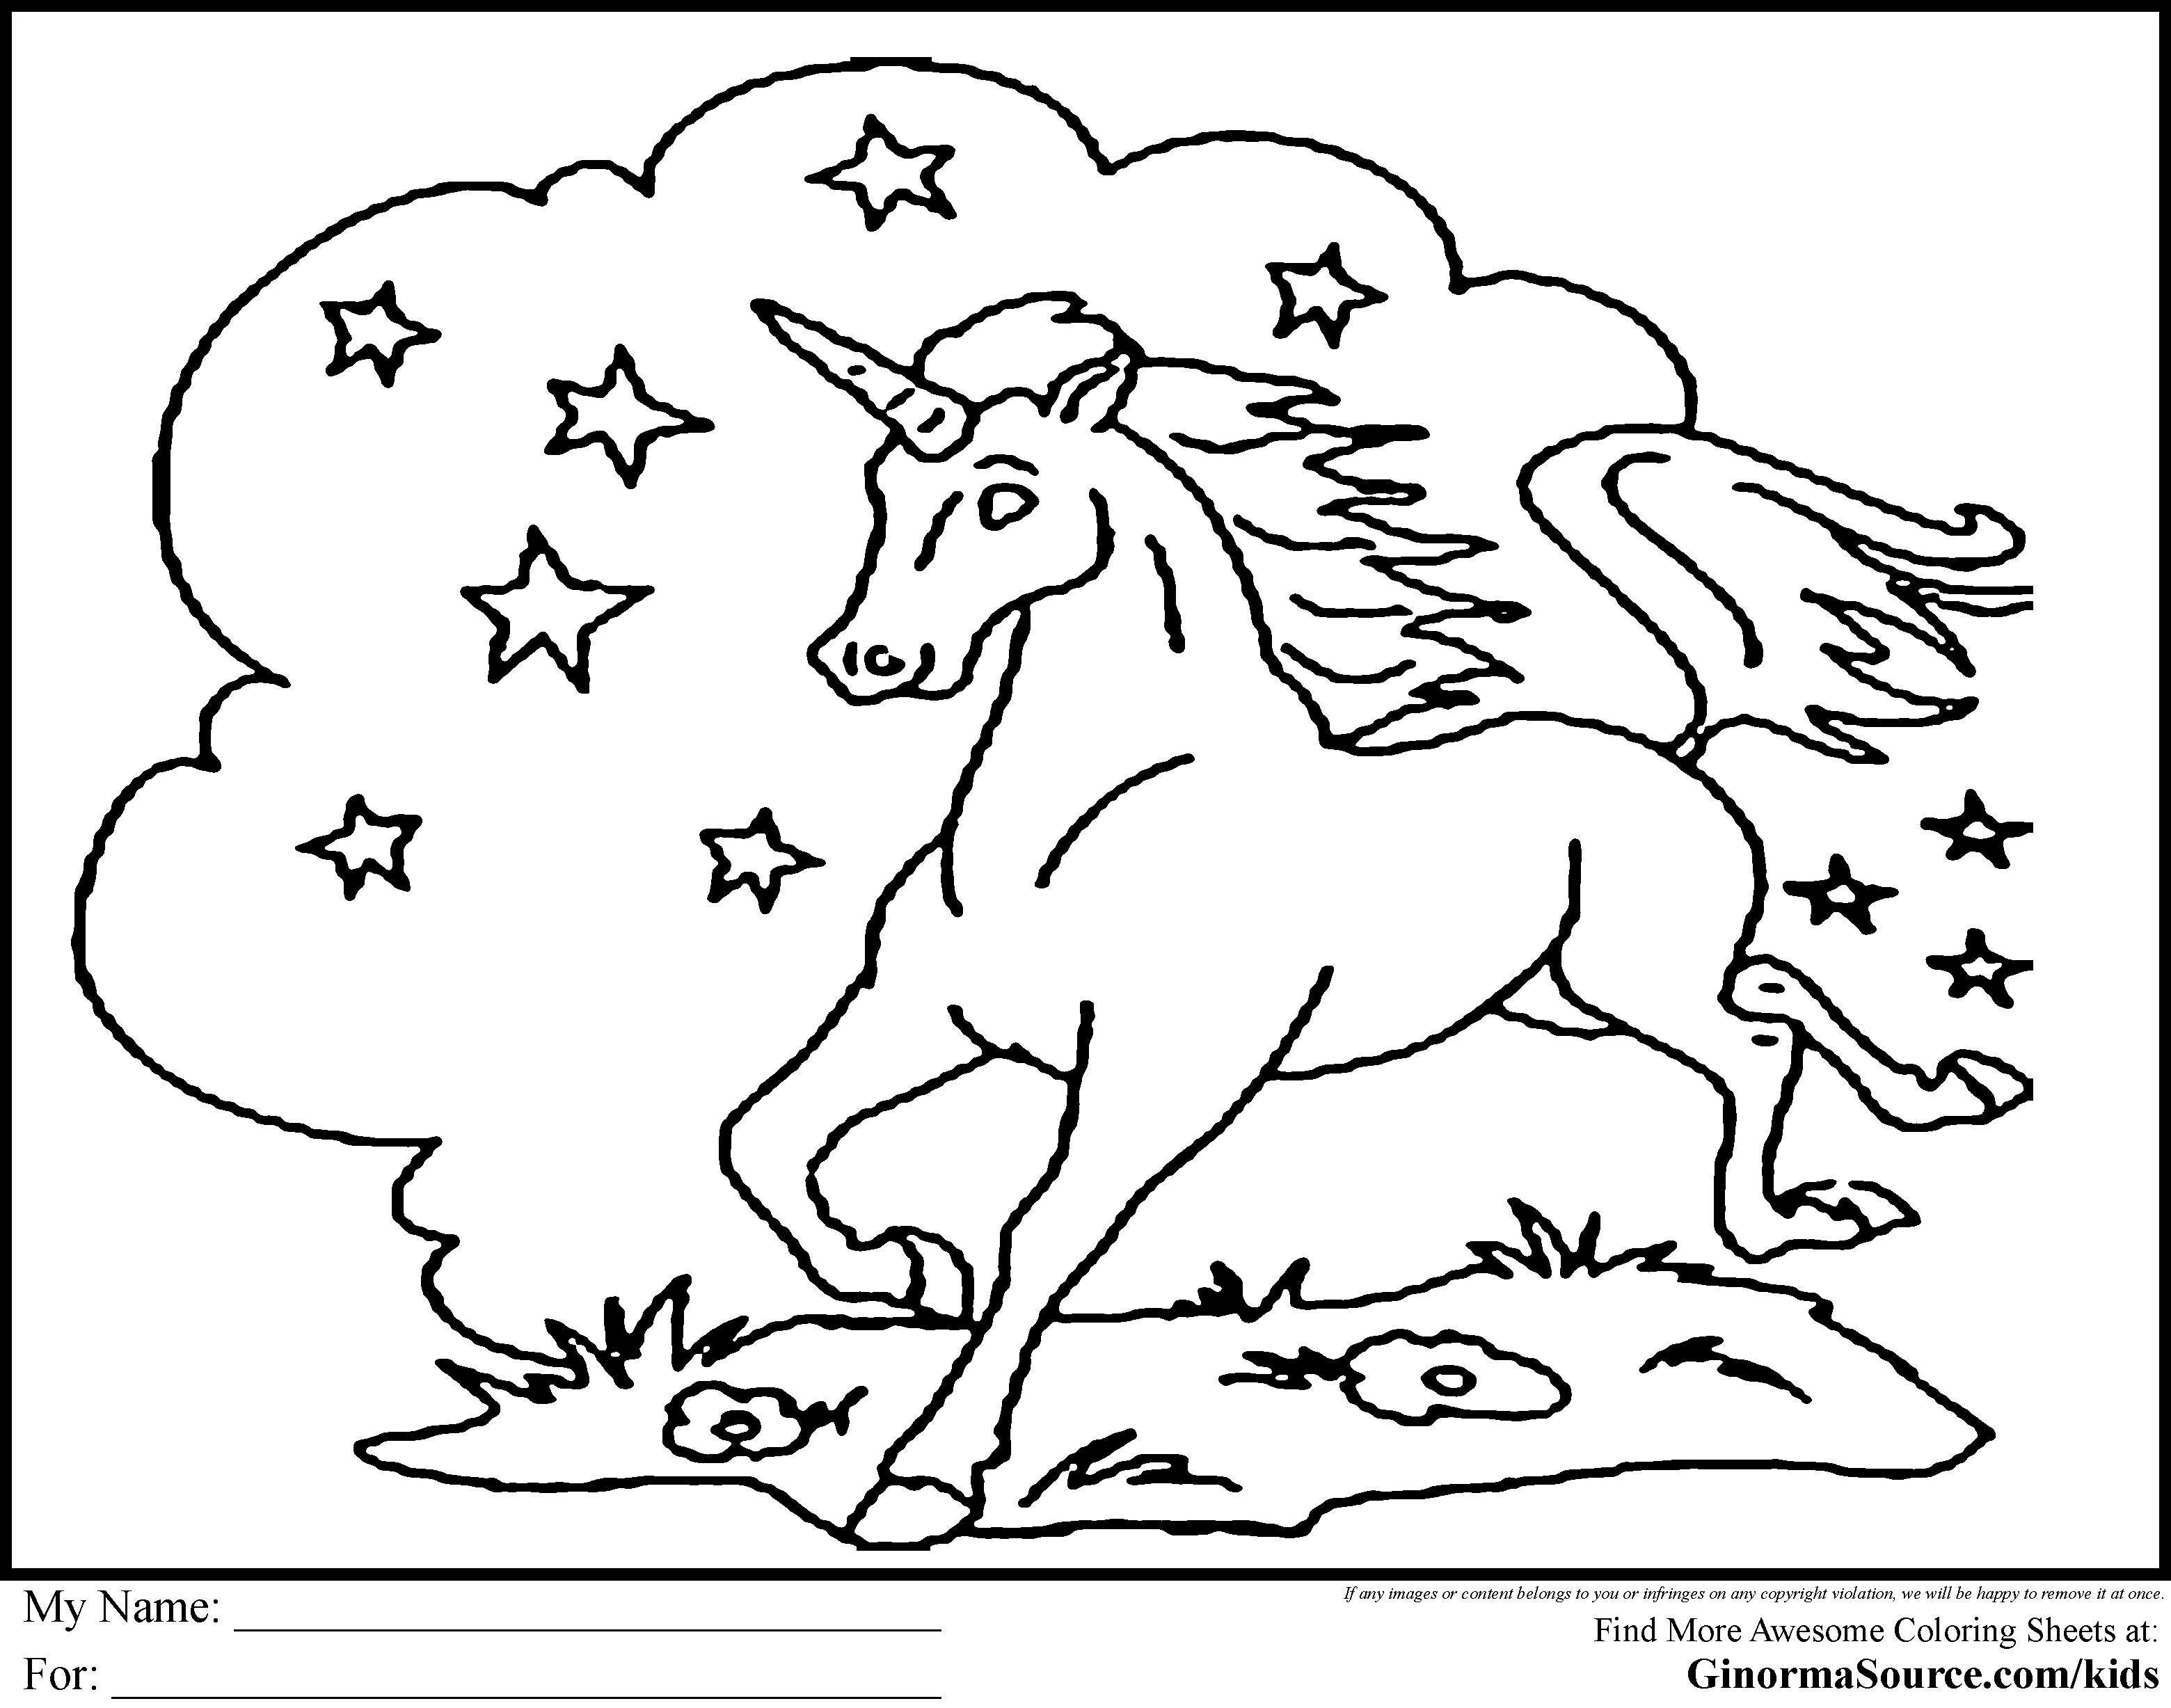 unicorn coloring pages full page - VoteForVerde.com